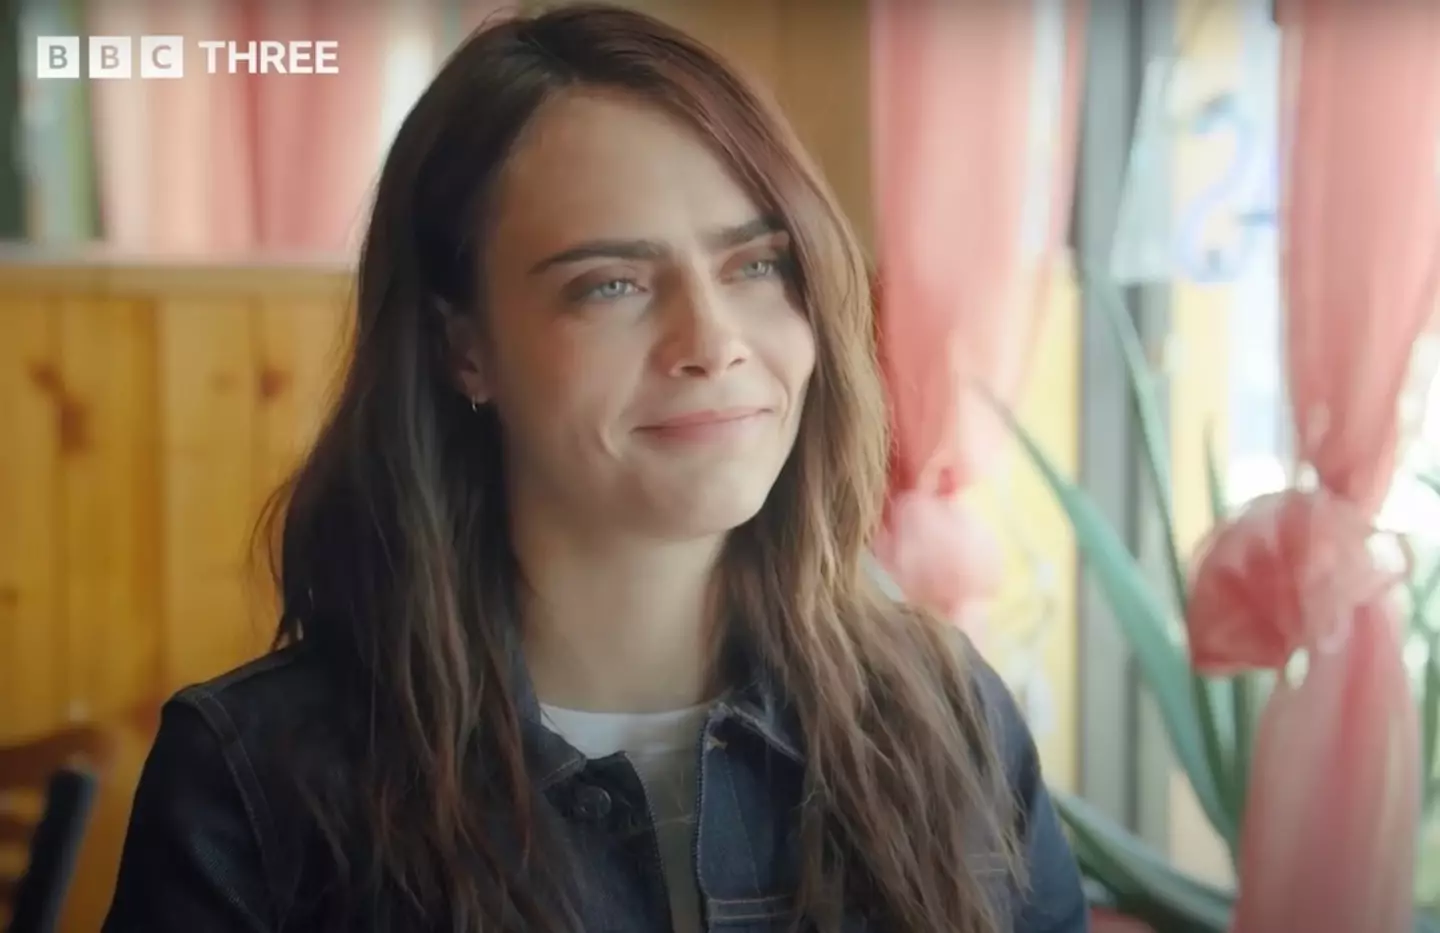 Cara Delevingne is exploring sex in a new documentary series.